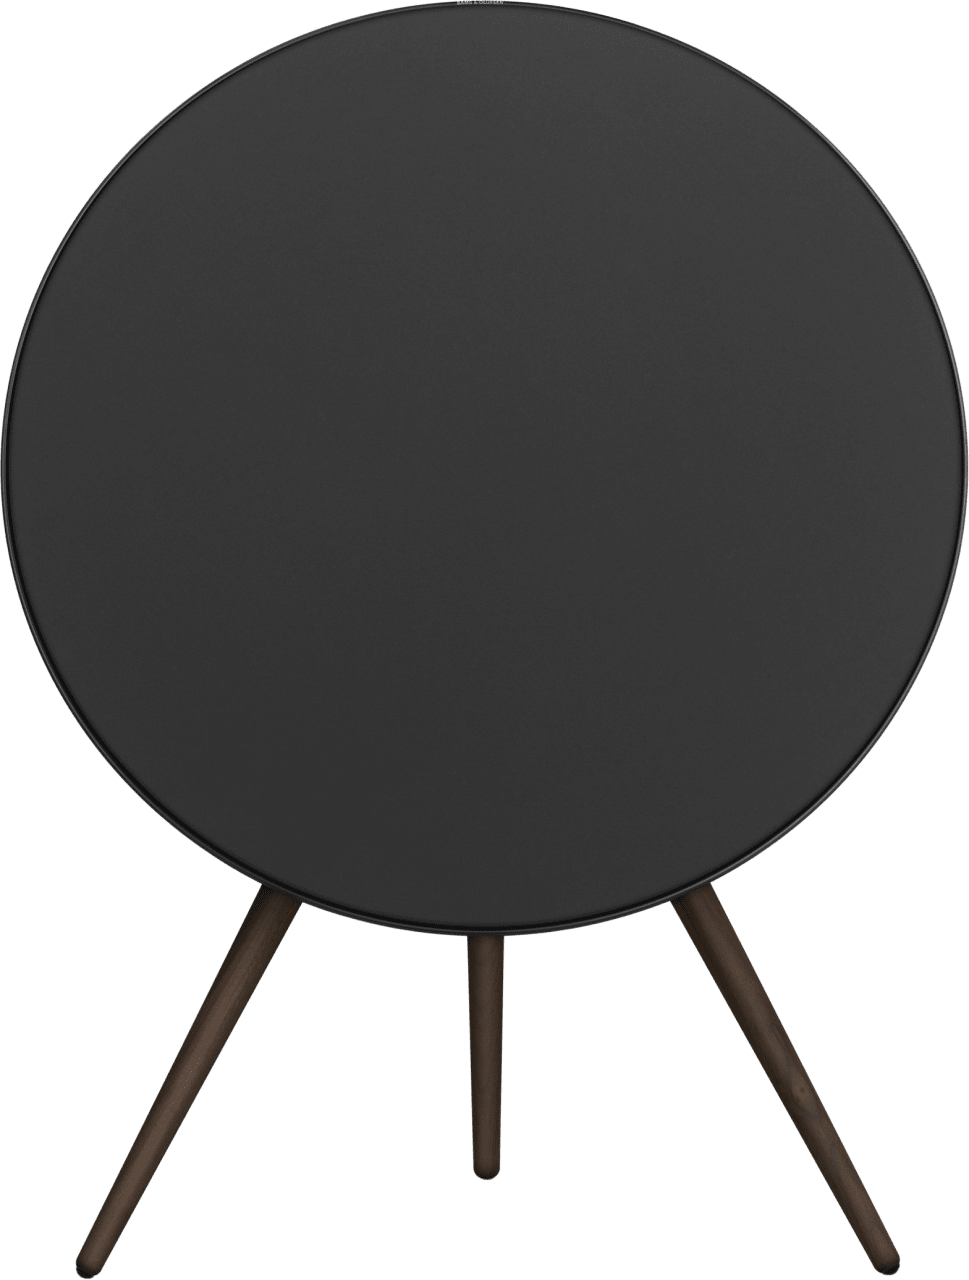 Black Bang & Olufsen Beoplay A9 4th Generation Multiroom WiFi Home Speaker (Google Assistant).1